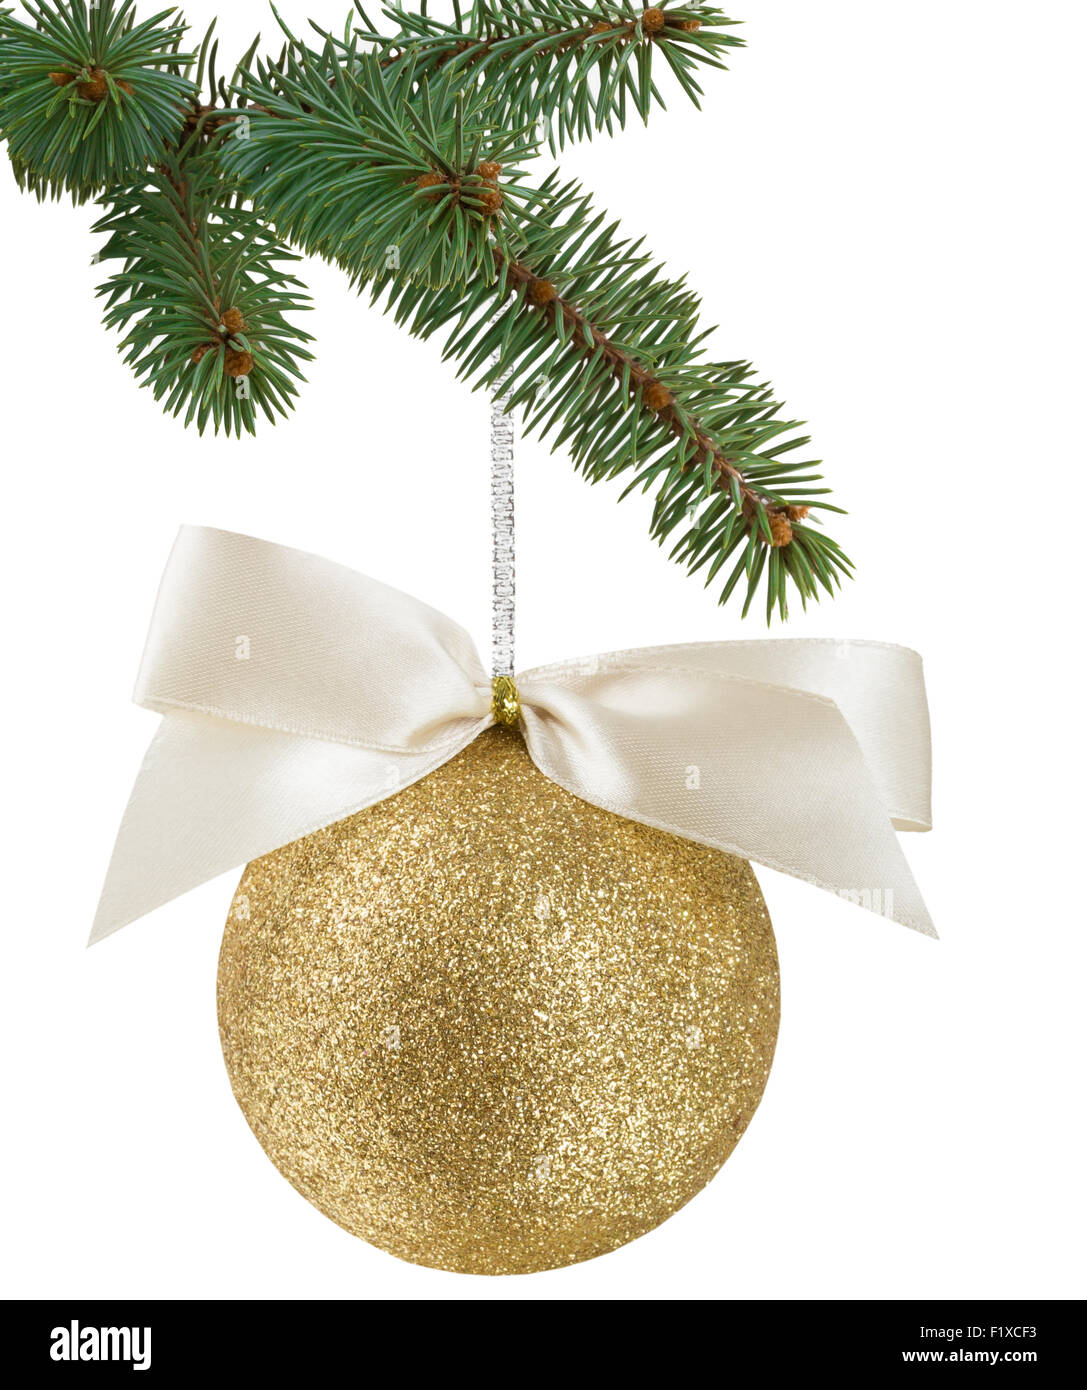 Christmas tree branch with a gold Christmas ball with ribbon. Stock Photo